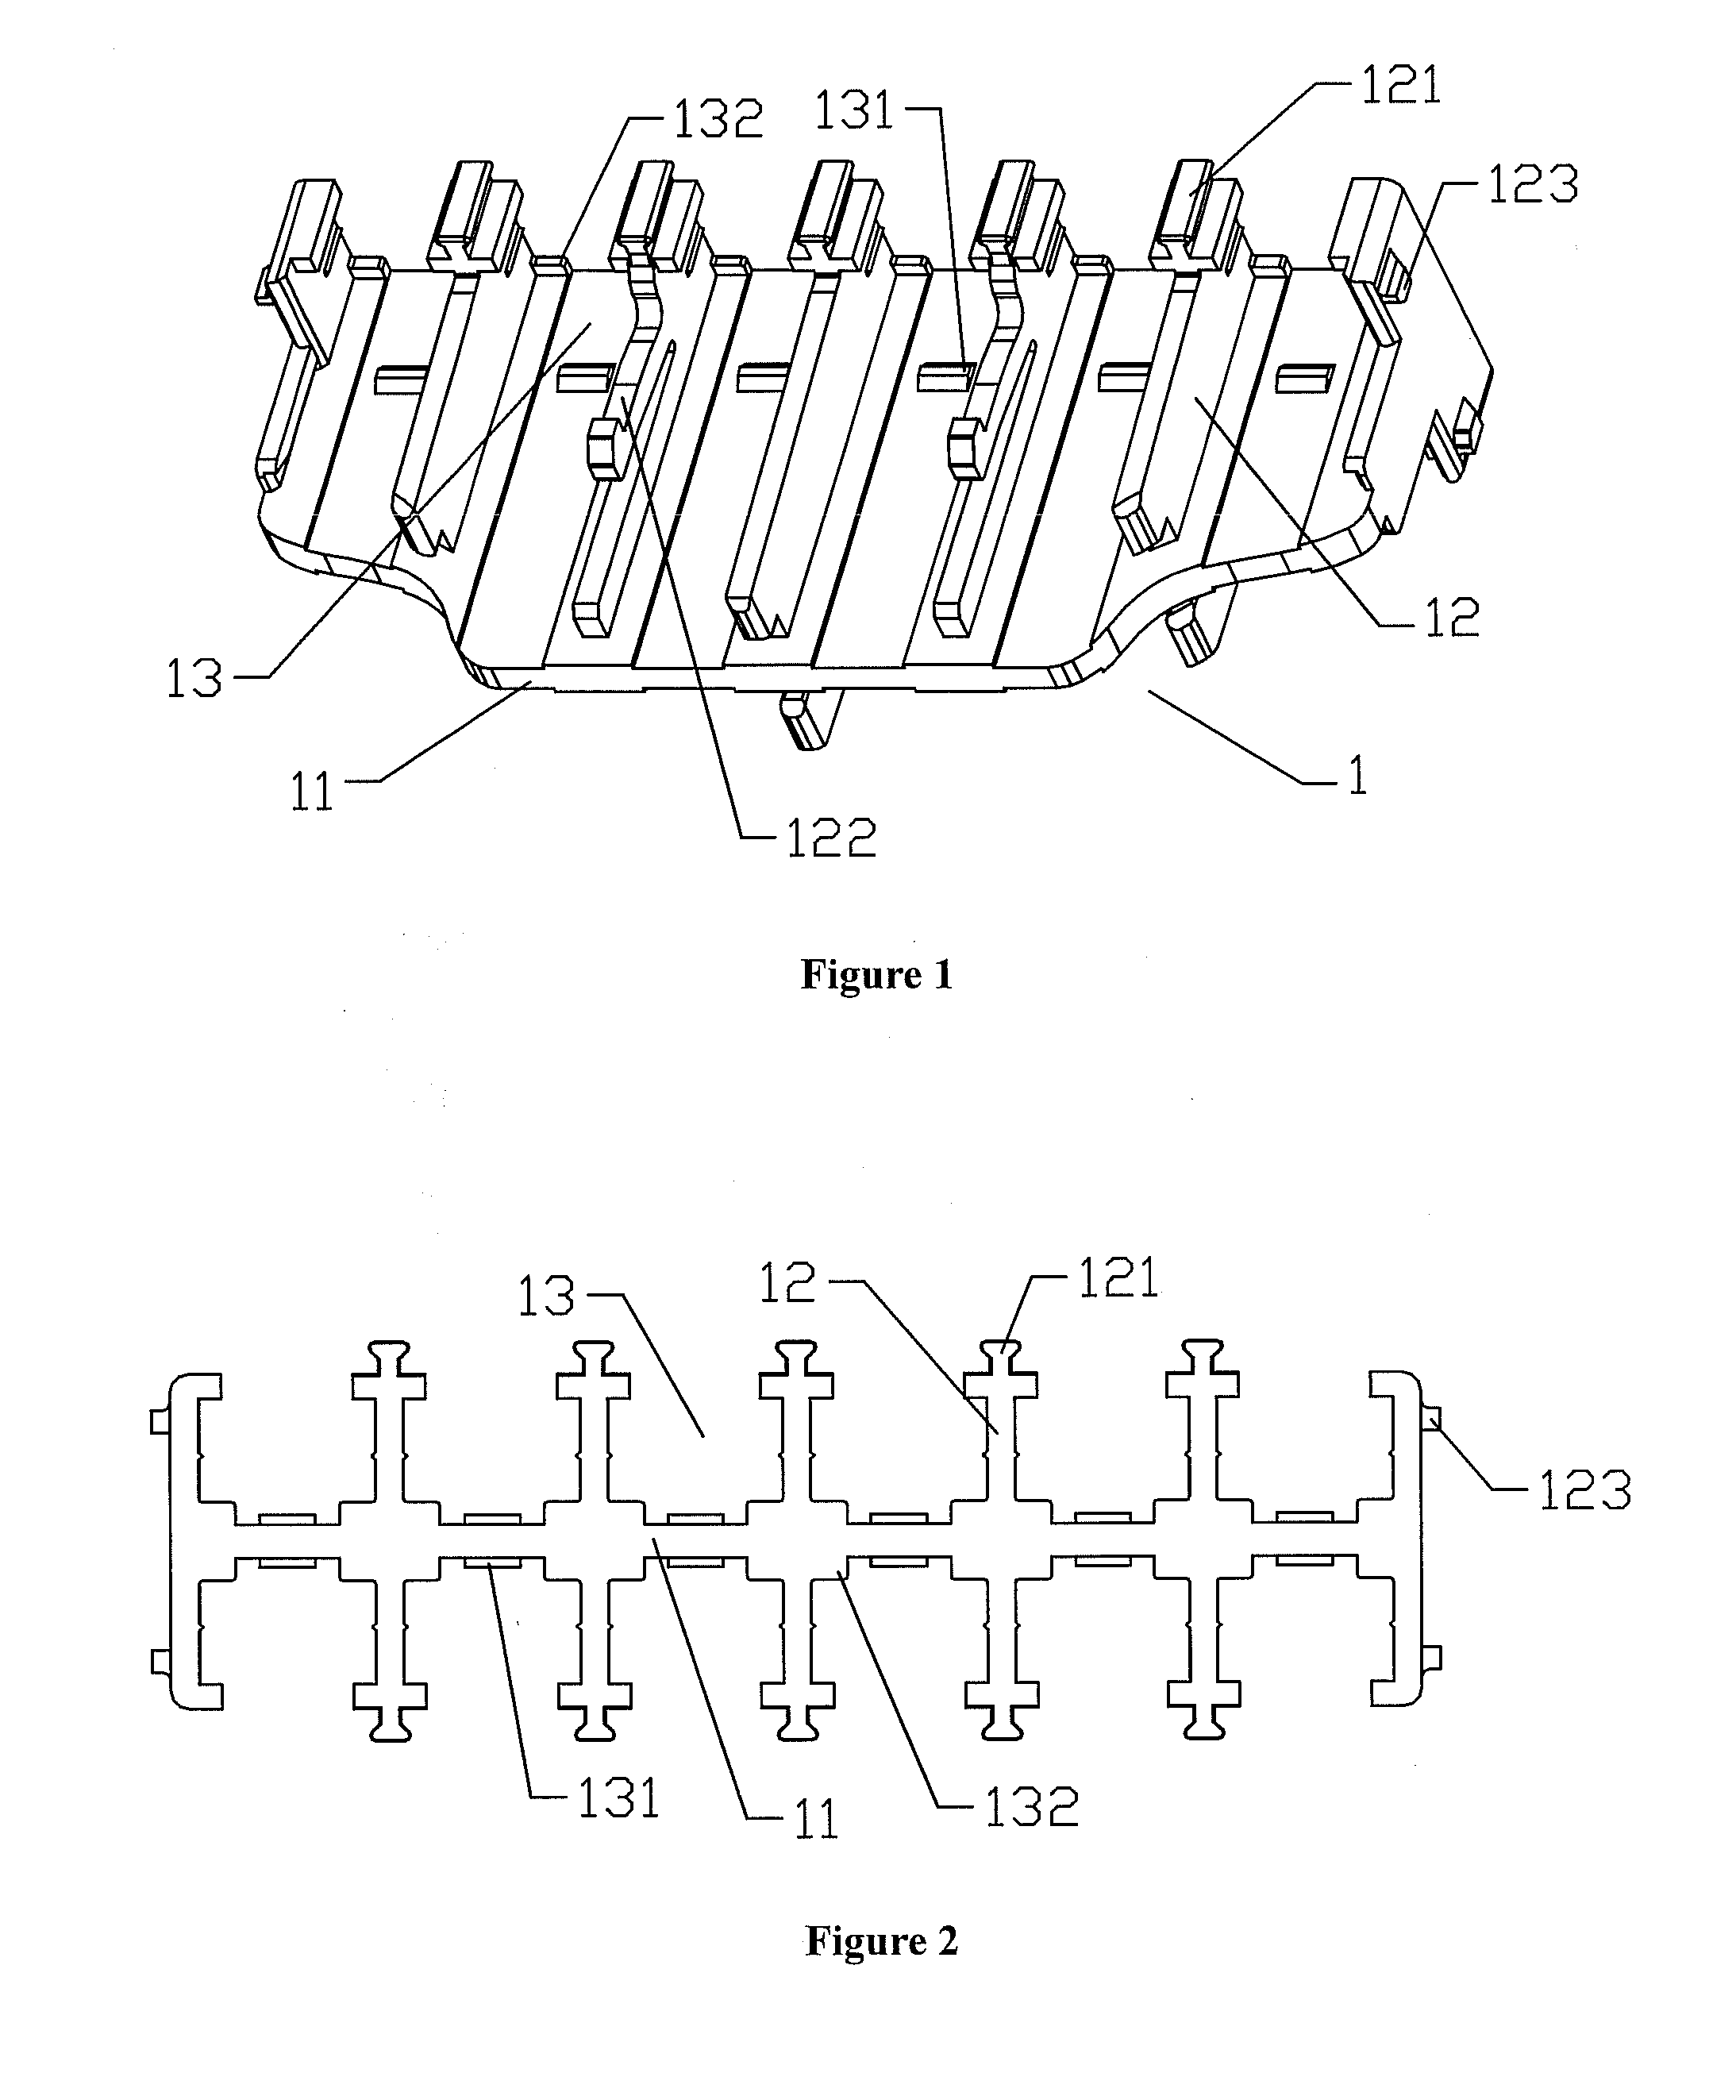 Switch Pack Assembly for Cable Clusters of Network Switches and the Special Release Tool Assembly Thereof